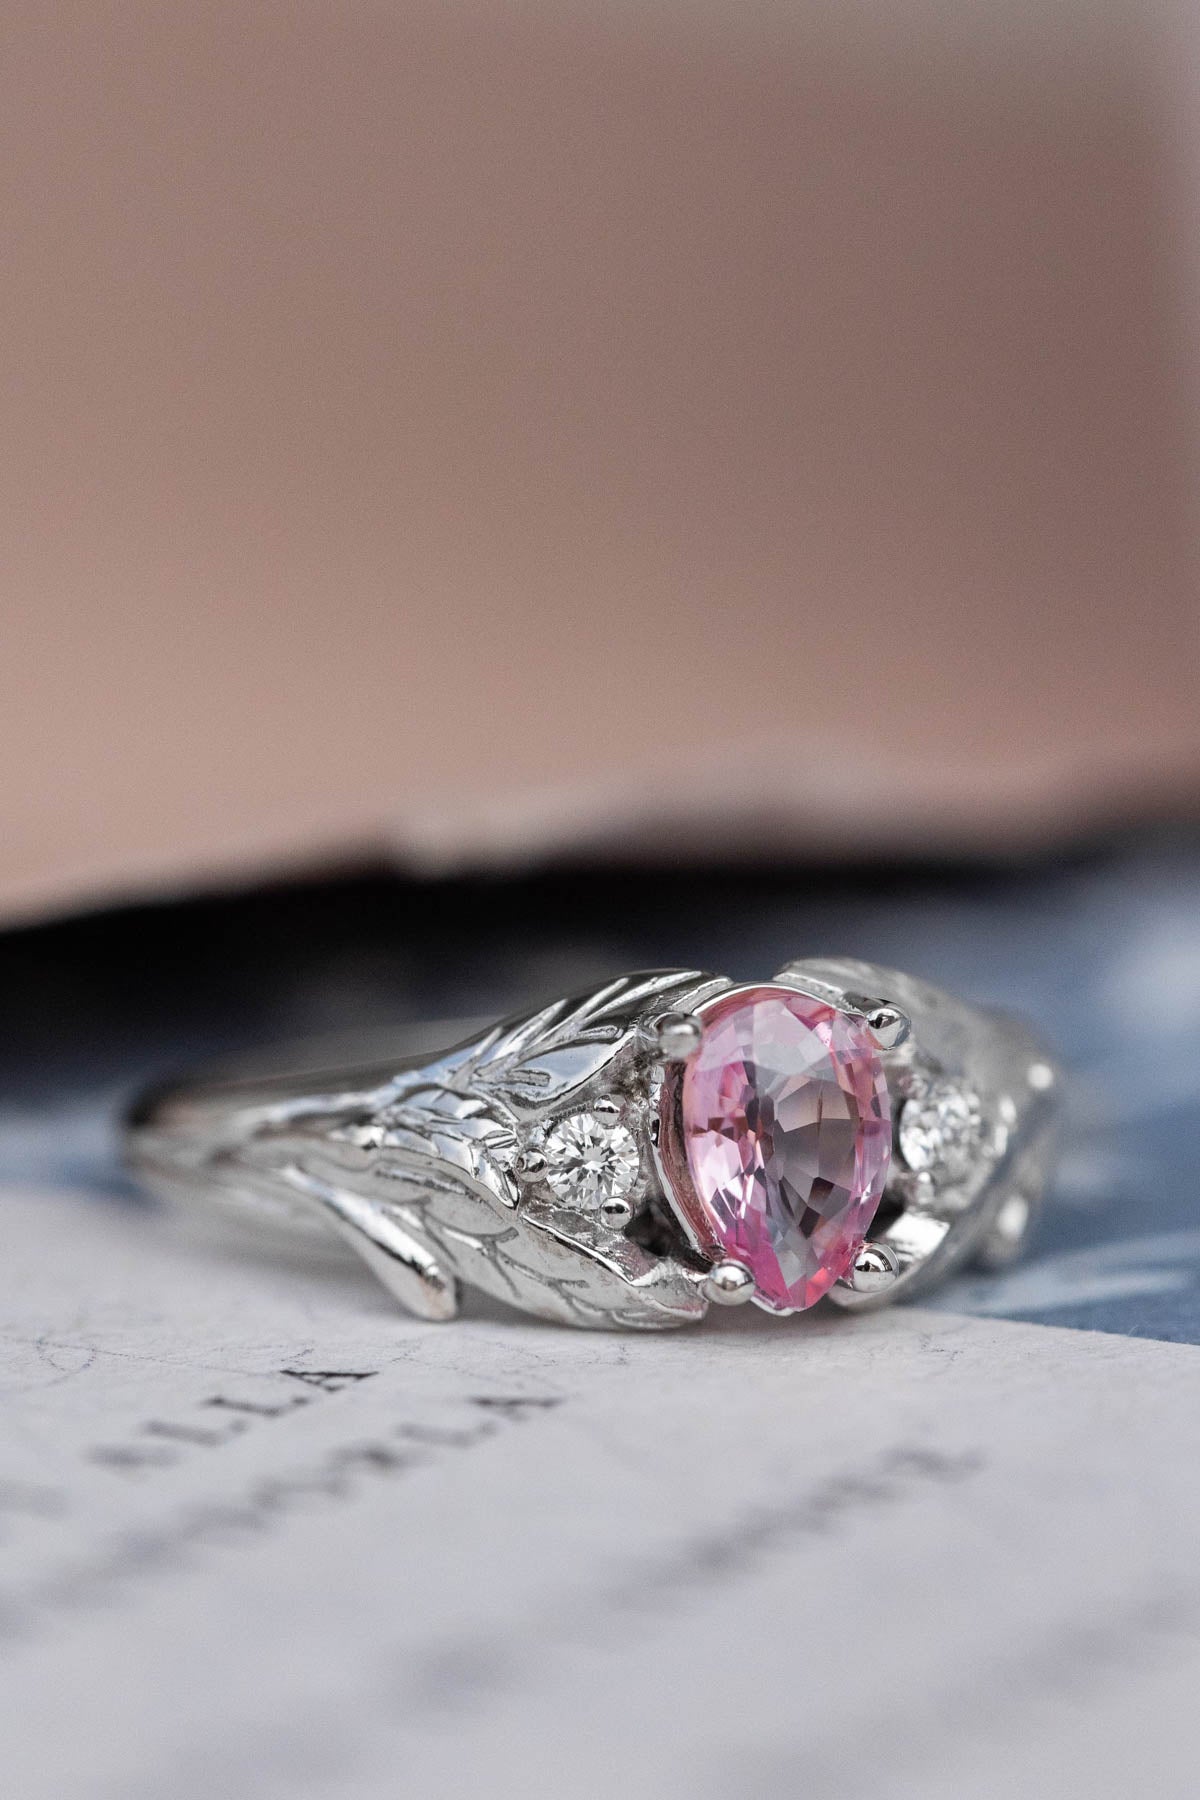 Natural pink sapphire engagement ring, white gold leaf proposal ring with accent diamonds / Wisteria - Eden Garden Jewelry™